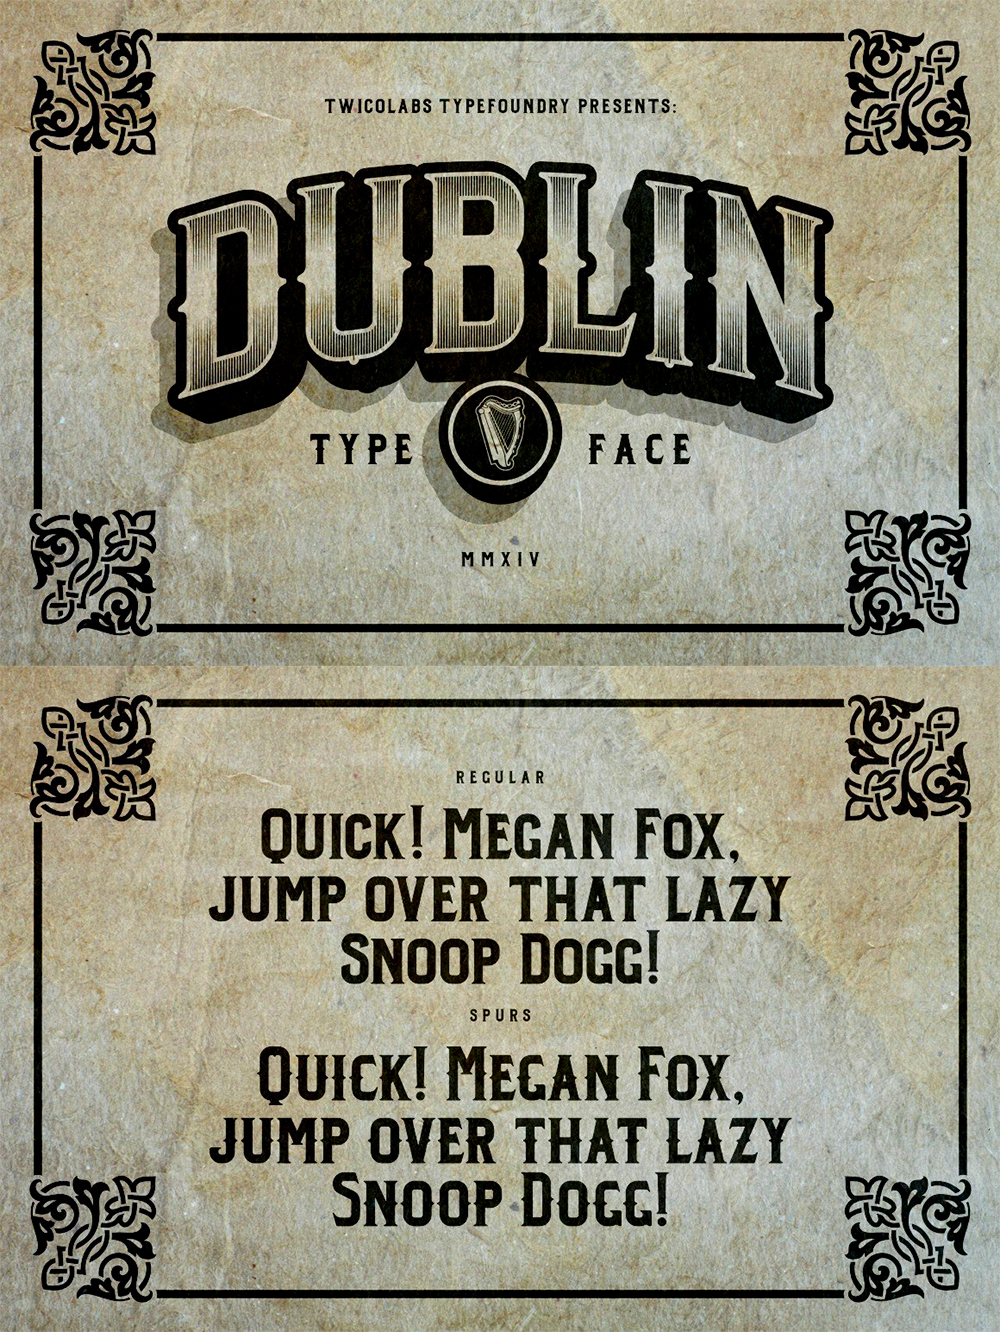 Images with text showcasing the awesome Dublin font.